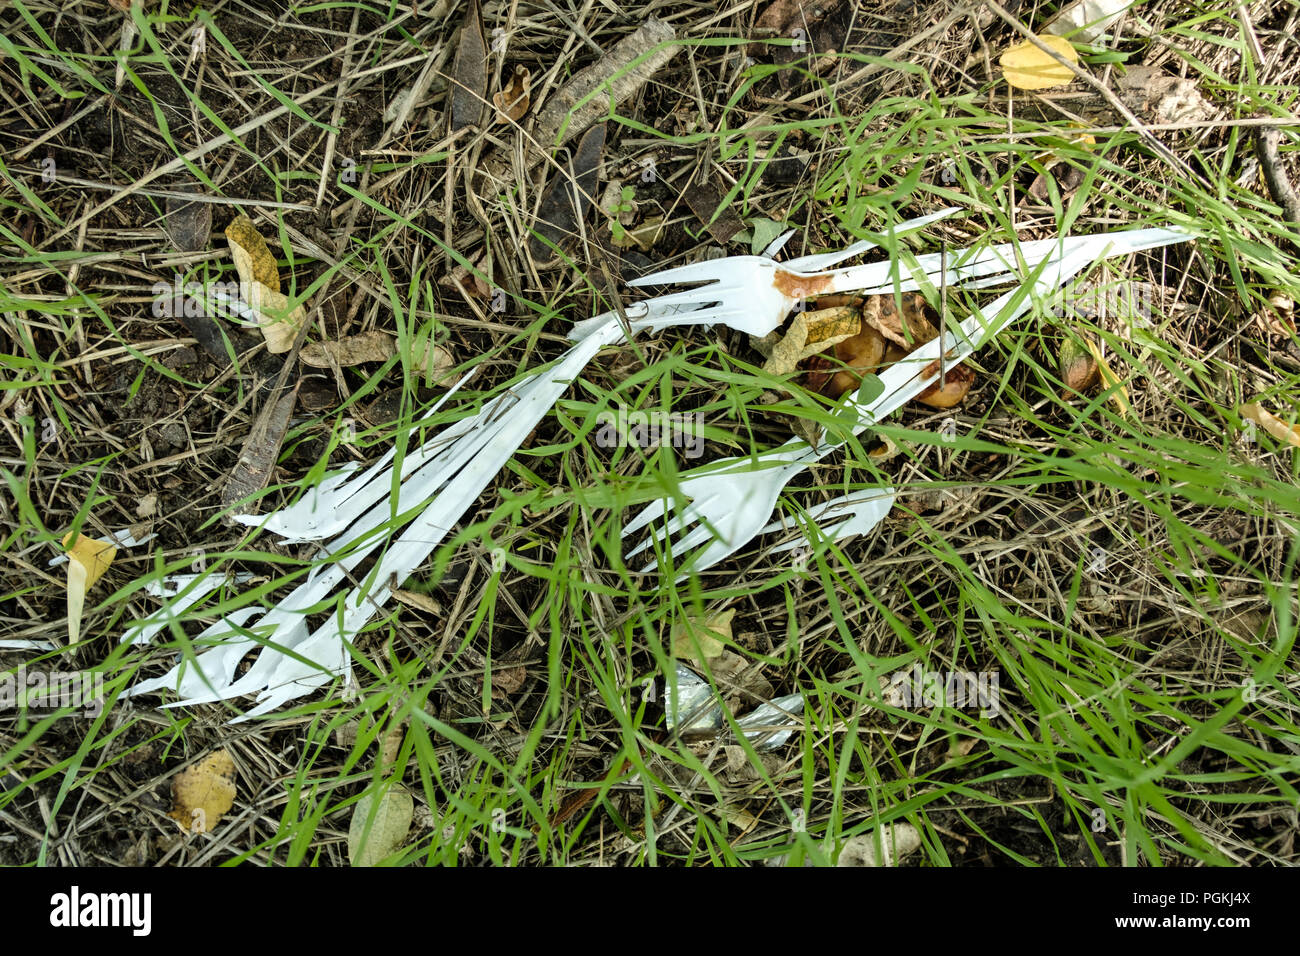 Plastic garbage on nature grows grass. Plastic forks. Plastic tableware. Stock Photo